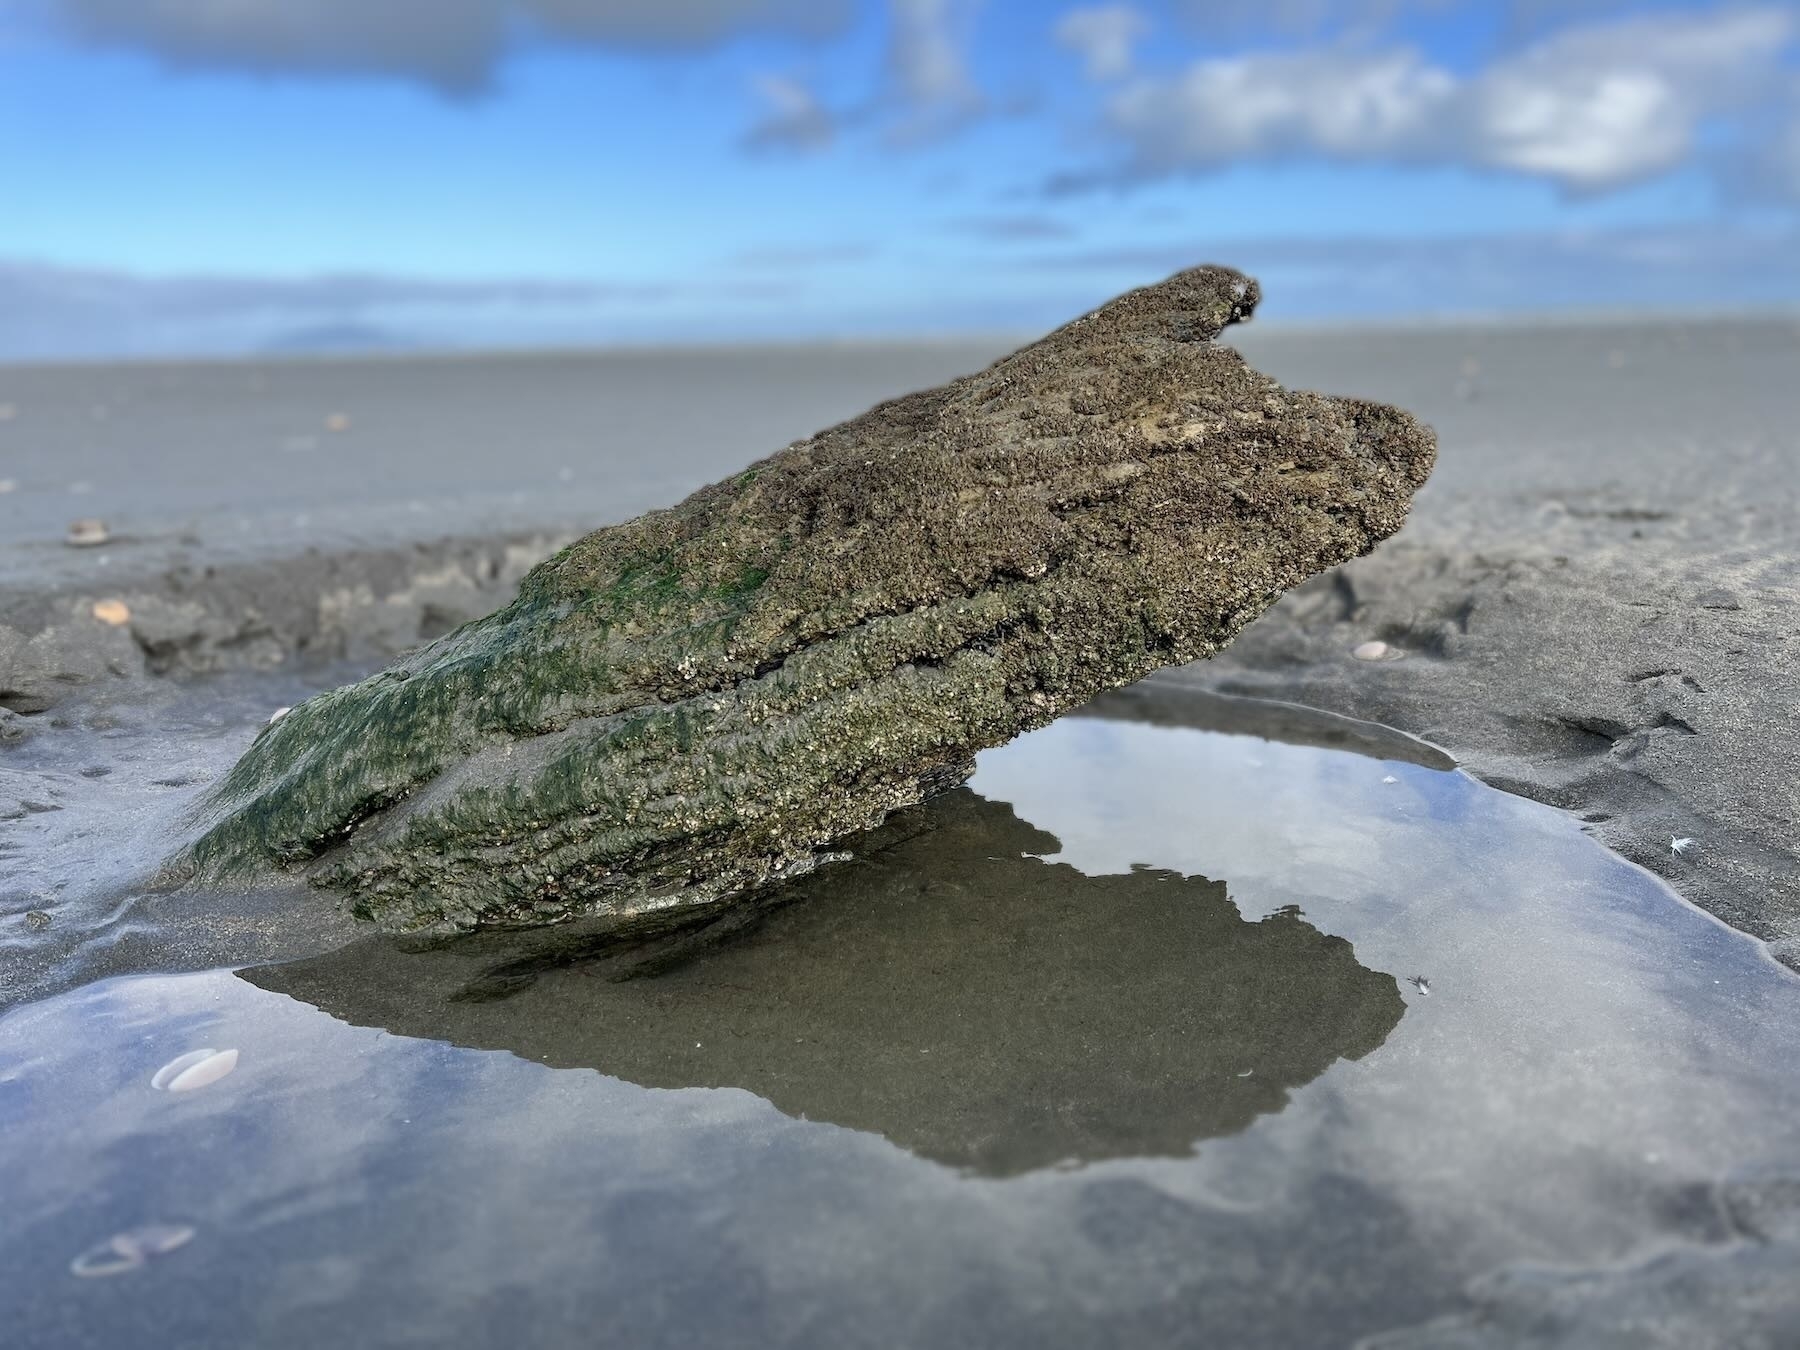 A sturdy piece of driftwood emerges from the sand, with a pool of water around it, left by the retreated tide. 